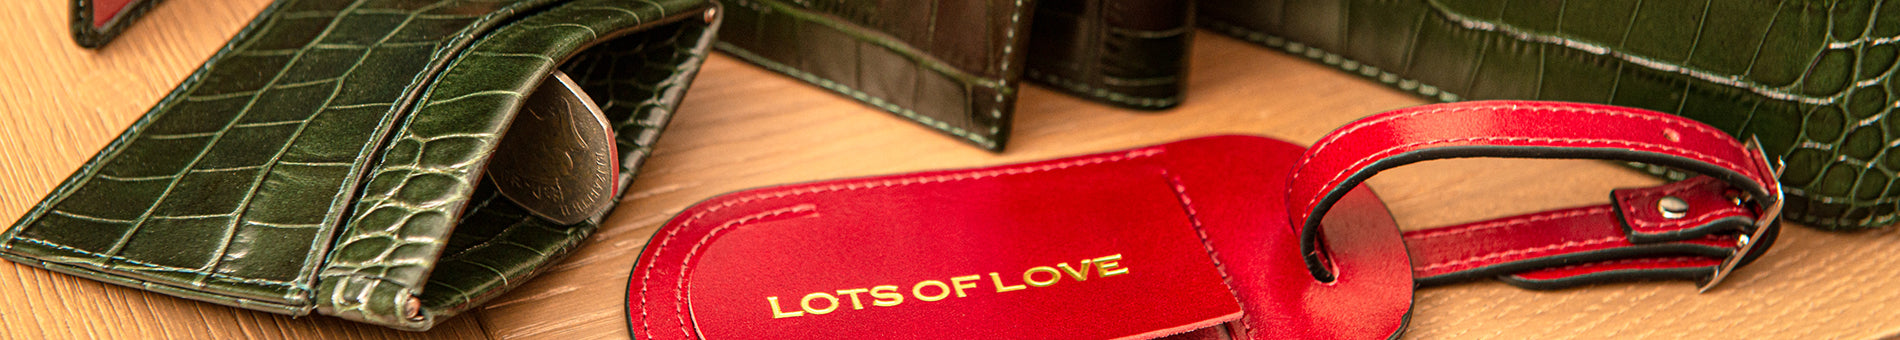 Leather Valentine's Day Gifts For Him